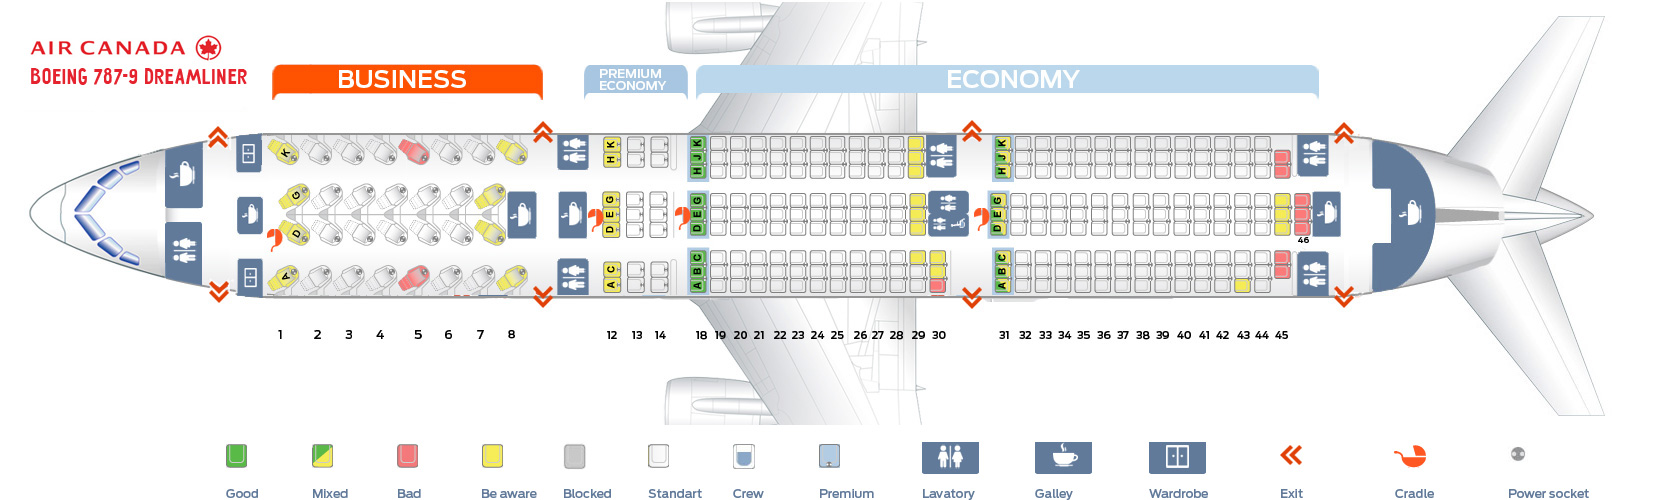 Seat map Boeing 7879 Dreamliner Air Canada. Best seats in